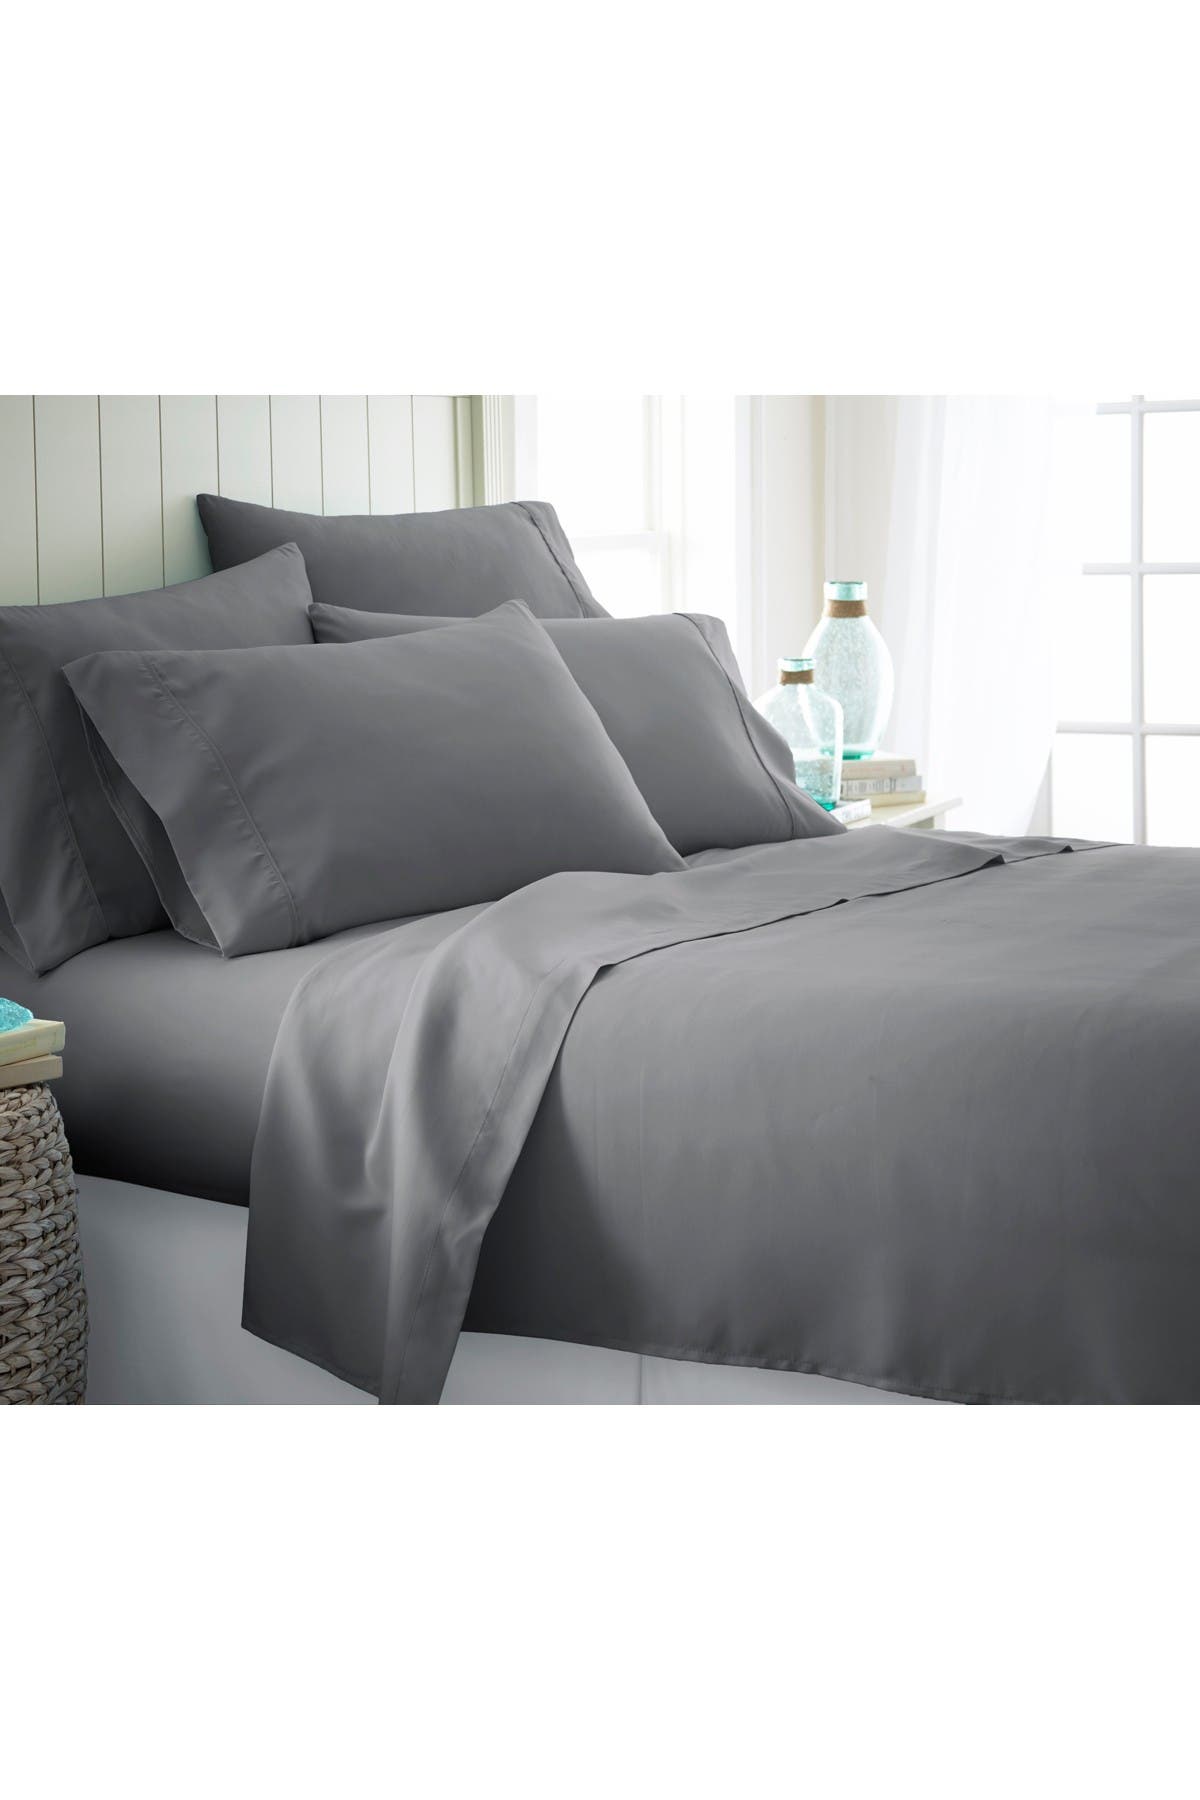 Ienjoy Home Queen Hotel Collection Premium Ultra Soft 6-piece Bed Sheet Set -gray In Grey